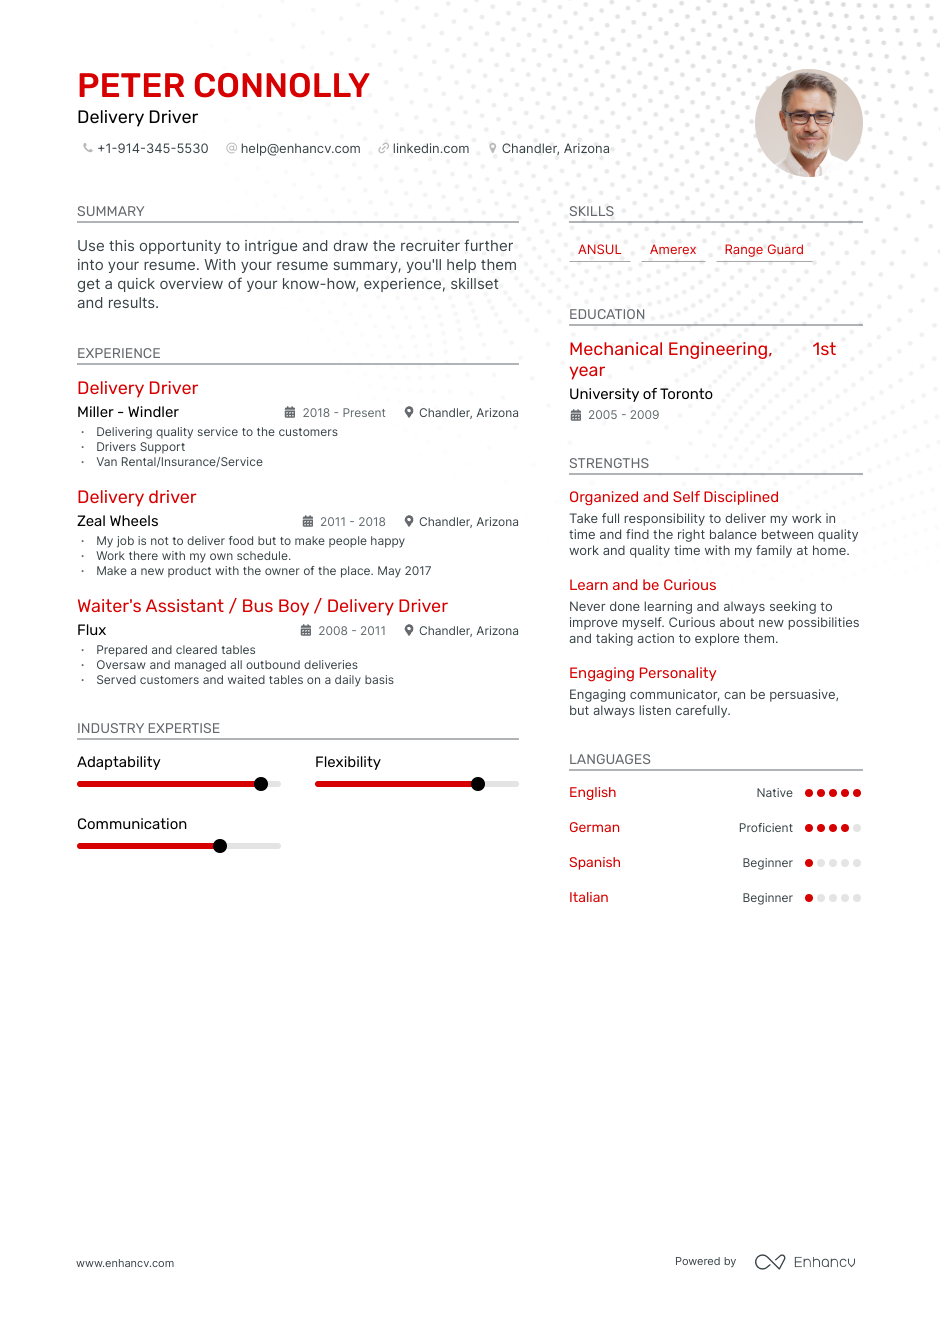 delivery driver resume example